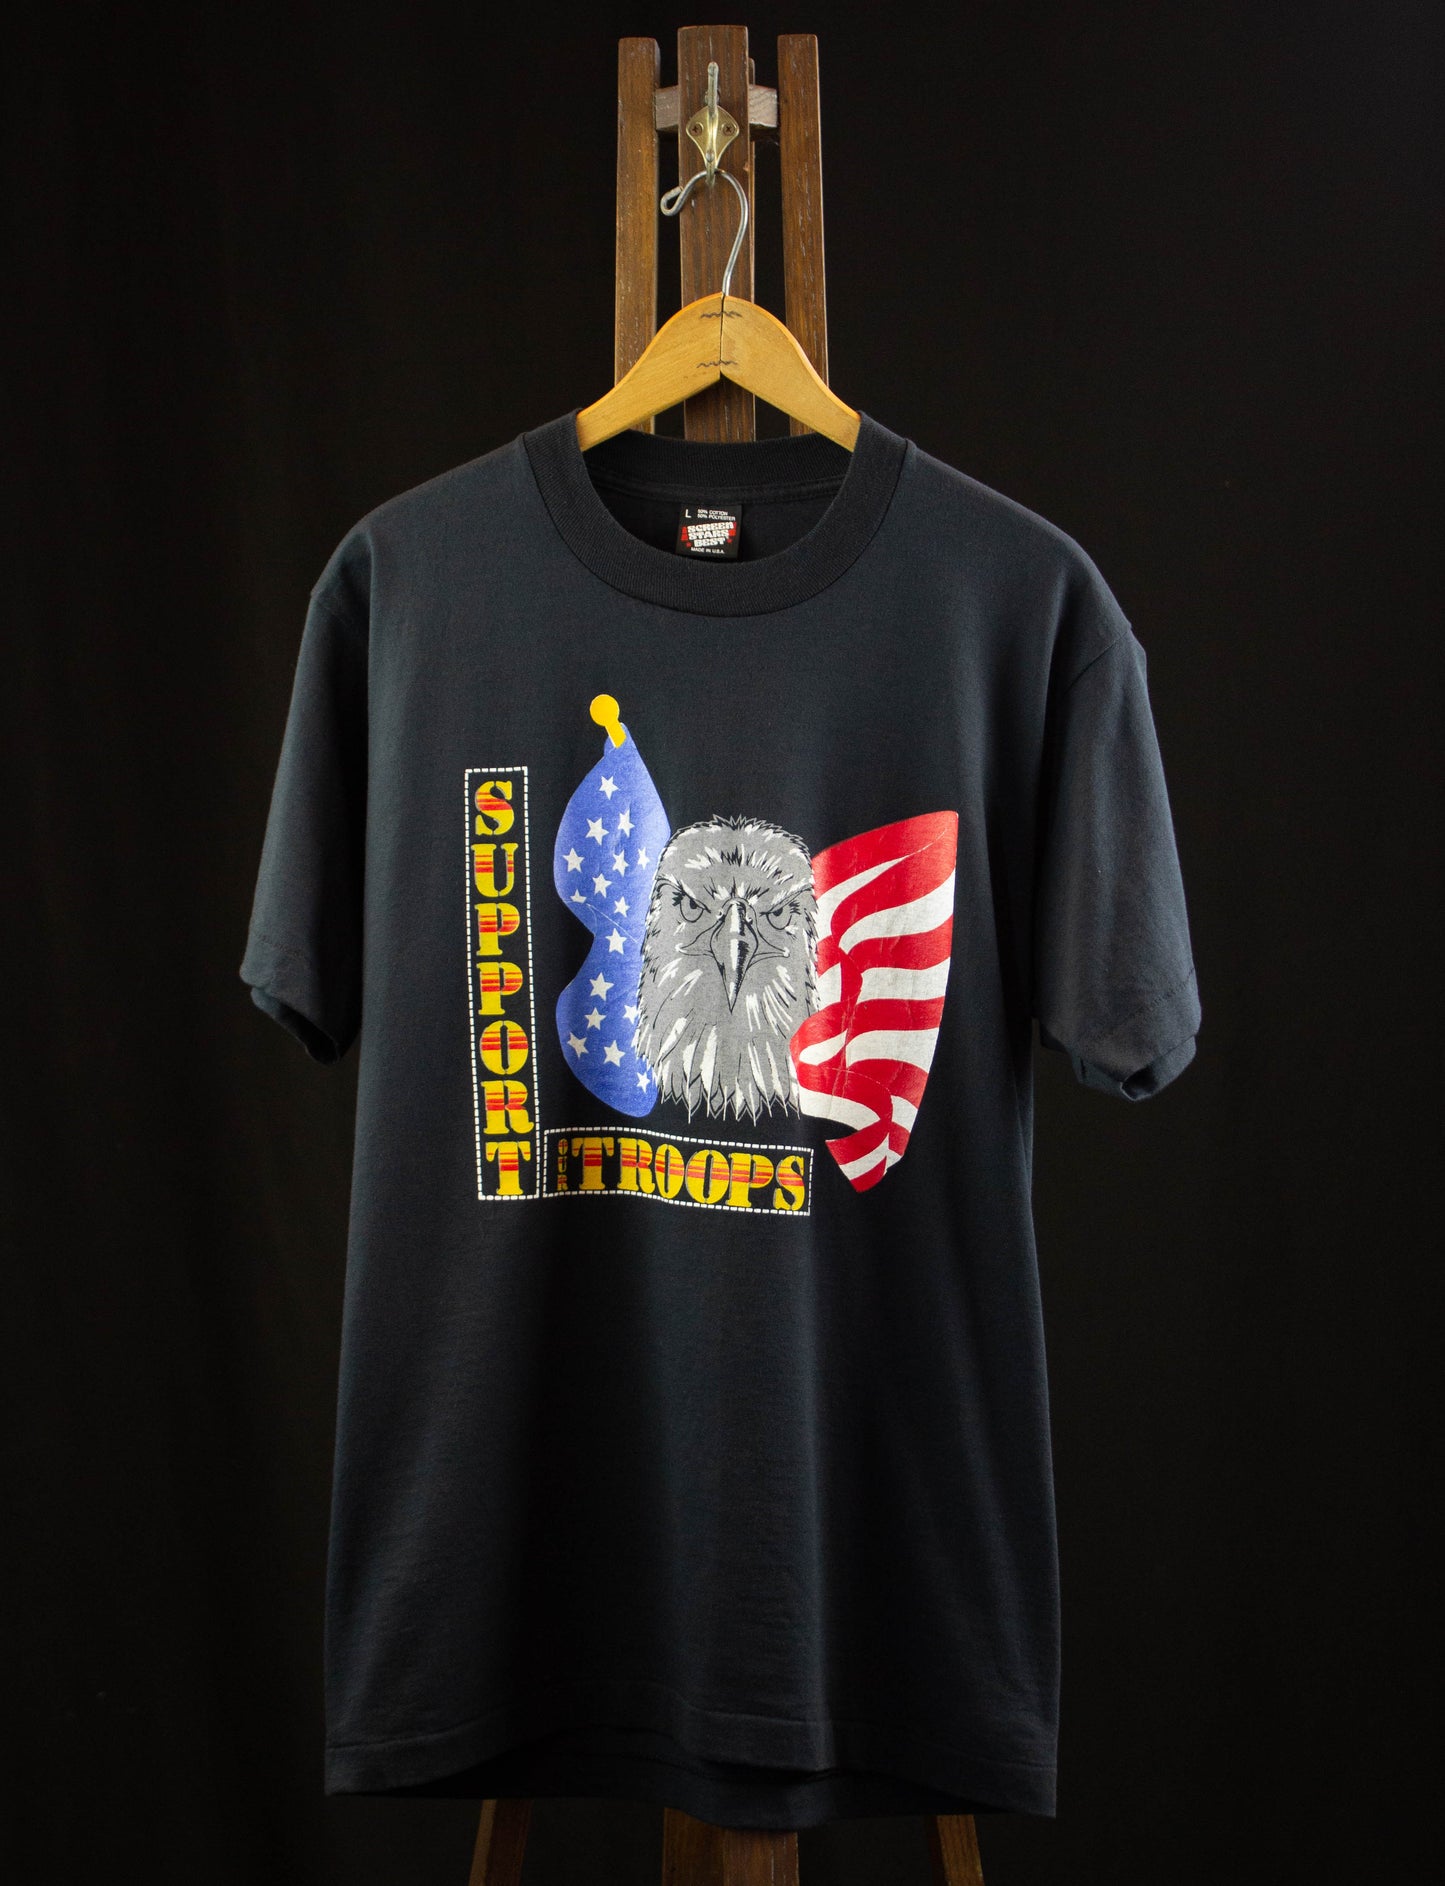 Vintage Support Our Troops Graphic T Shirt 90s American Flag and Eagle Black Medium-Large